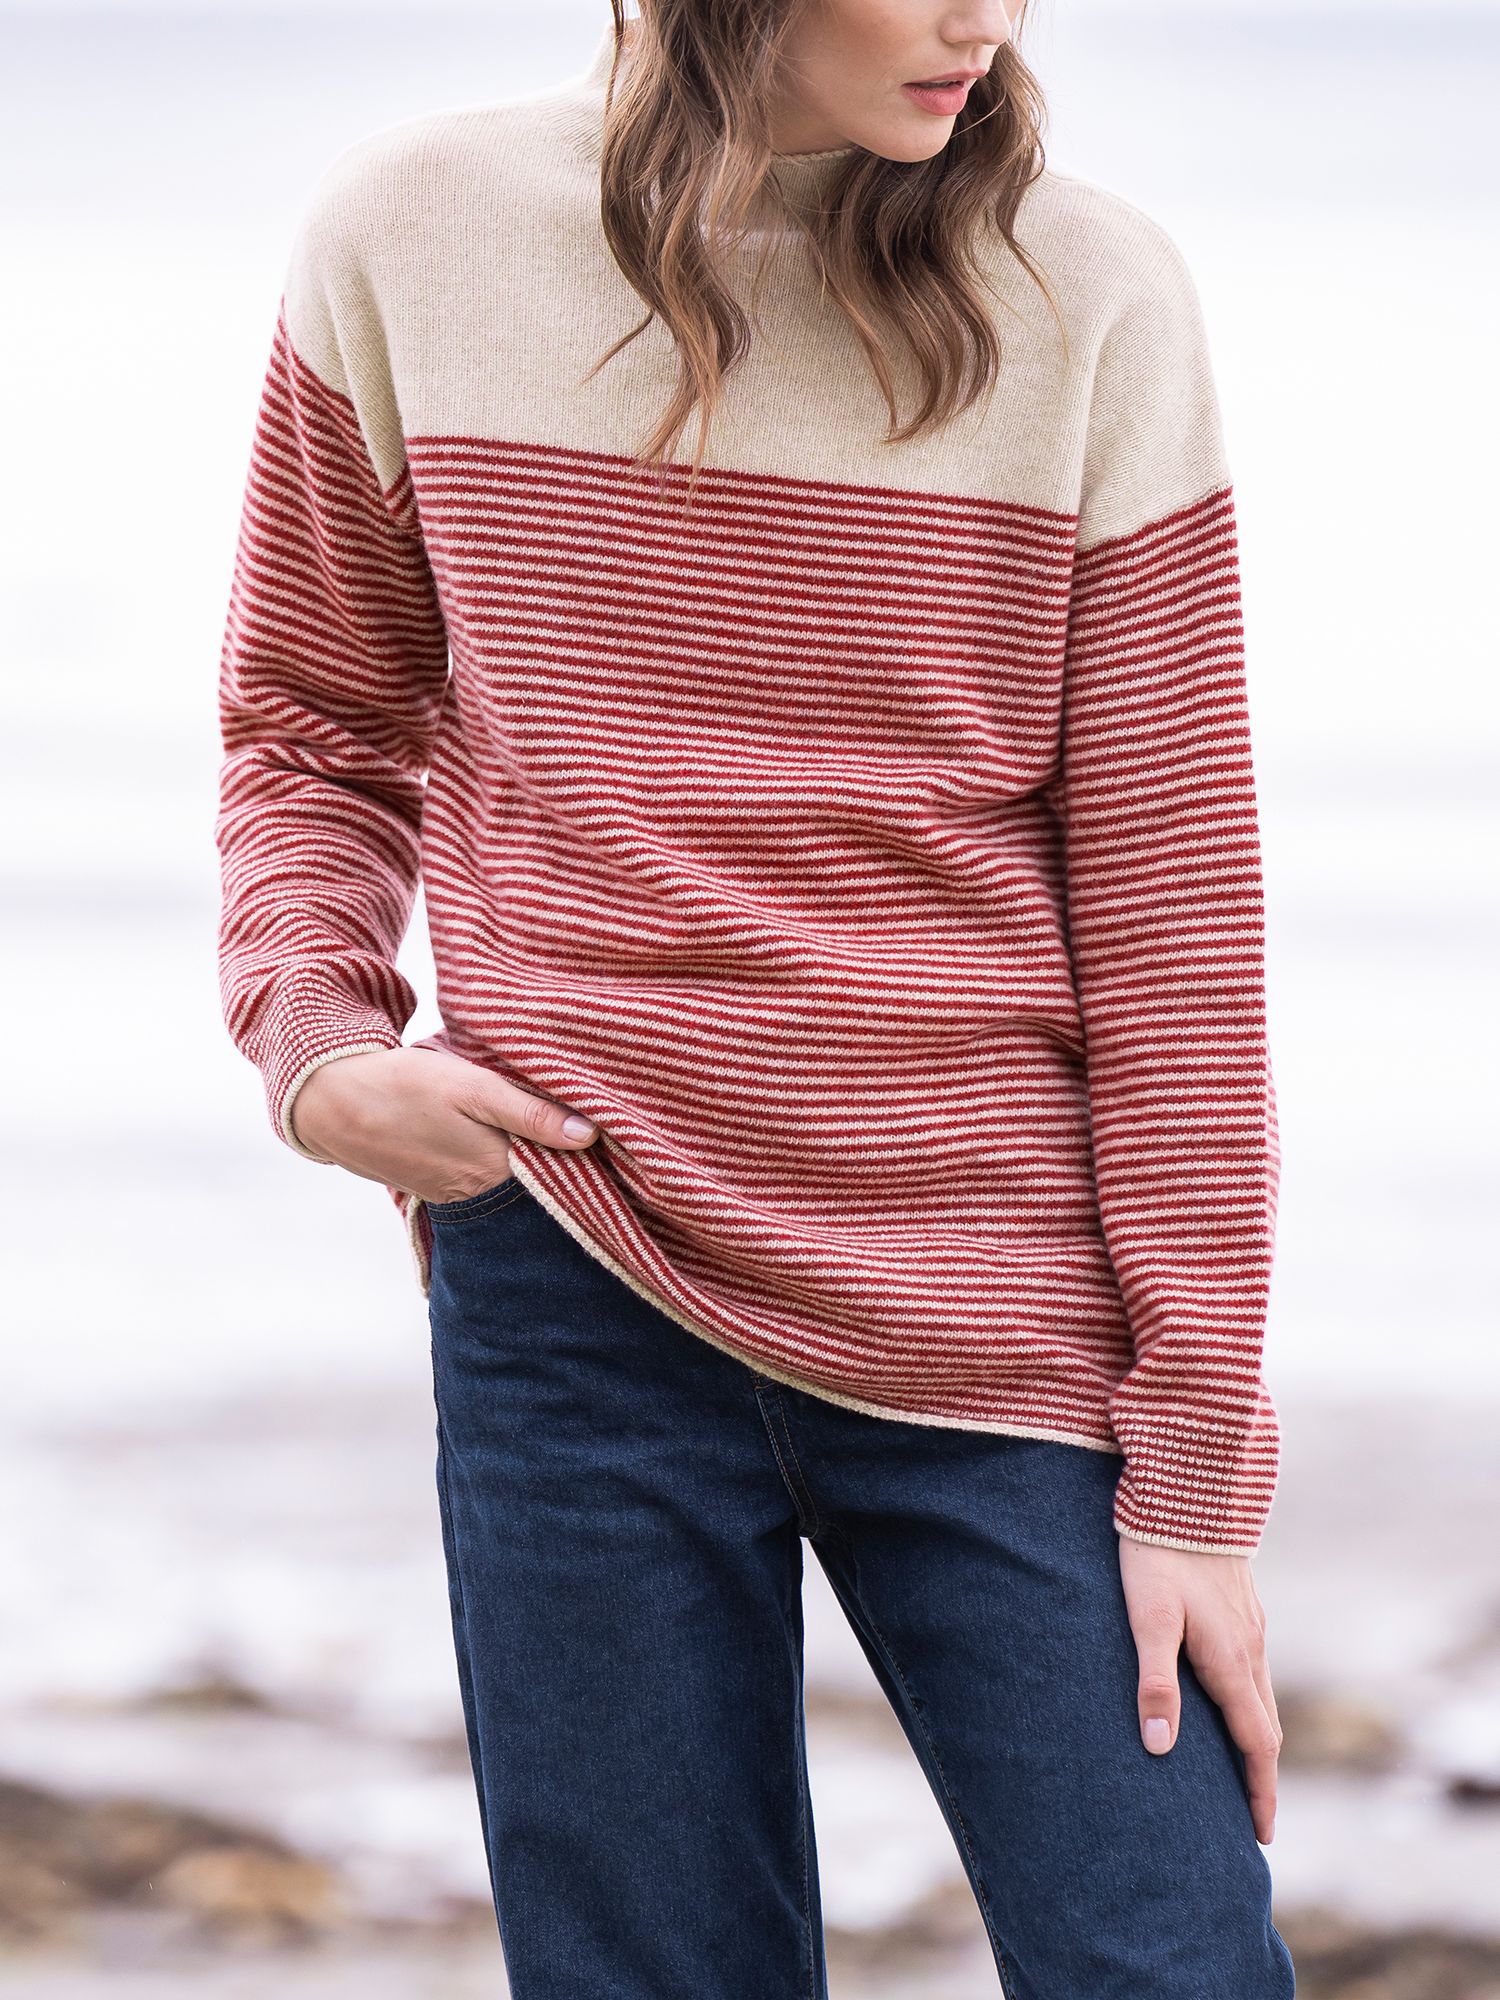 Buy Celtic & Co. Felted Finish Funnel Neck Striped Wool Jumper, Oatmeal/Anemone Online at johnlewis.com